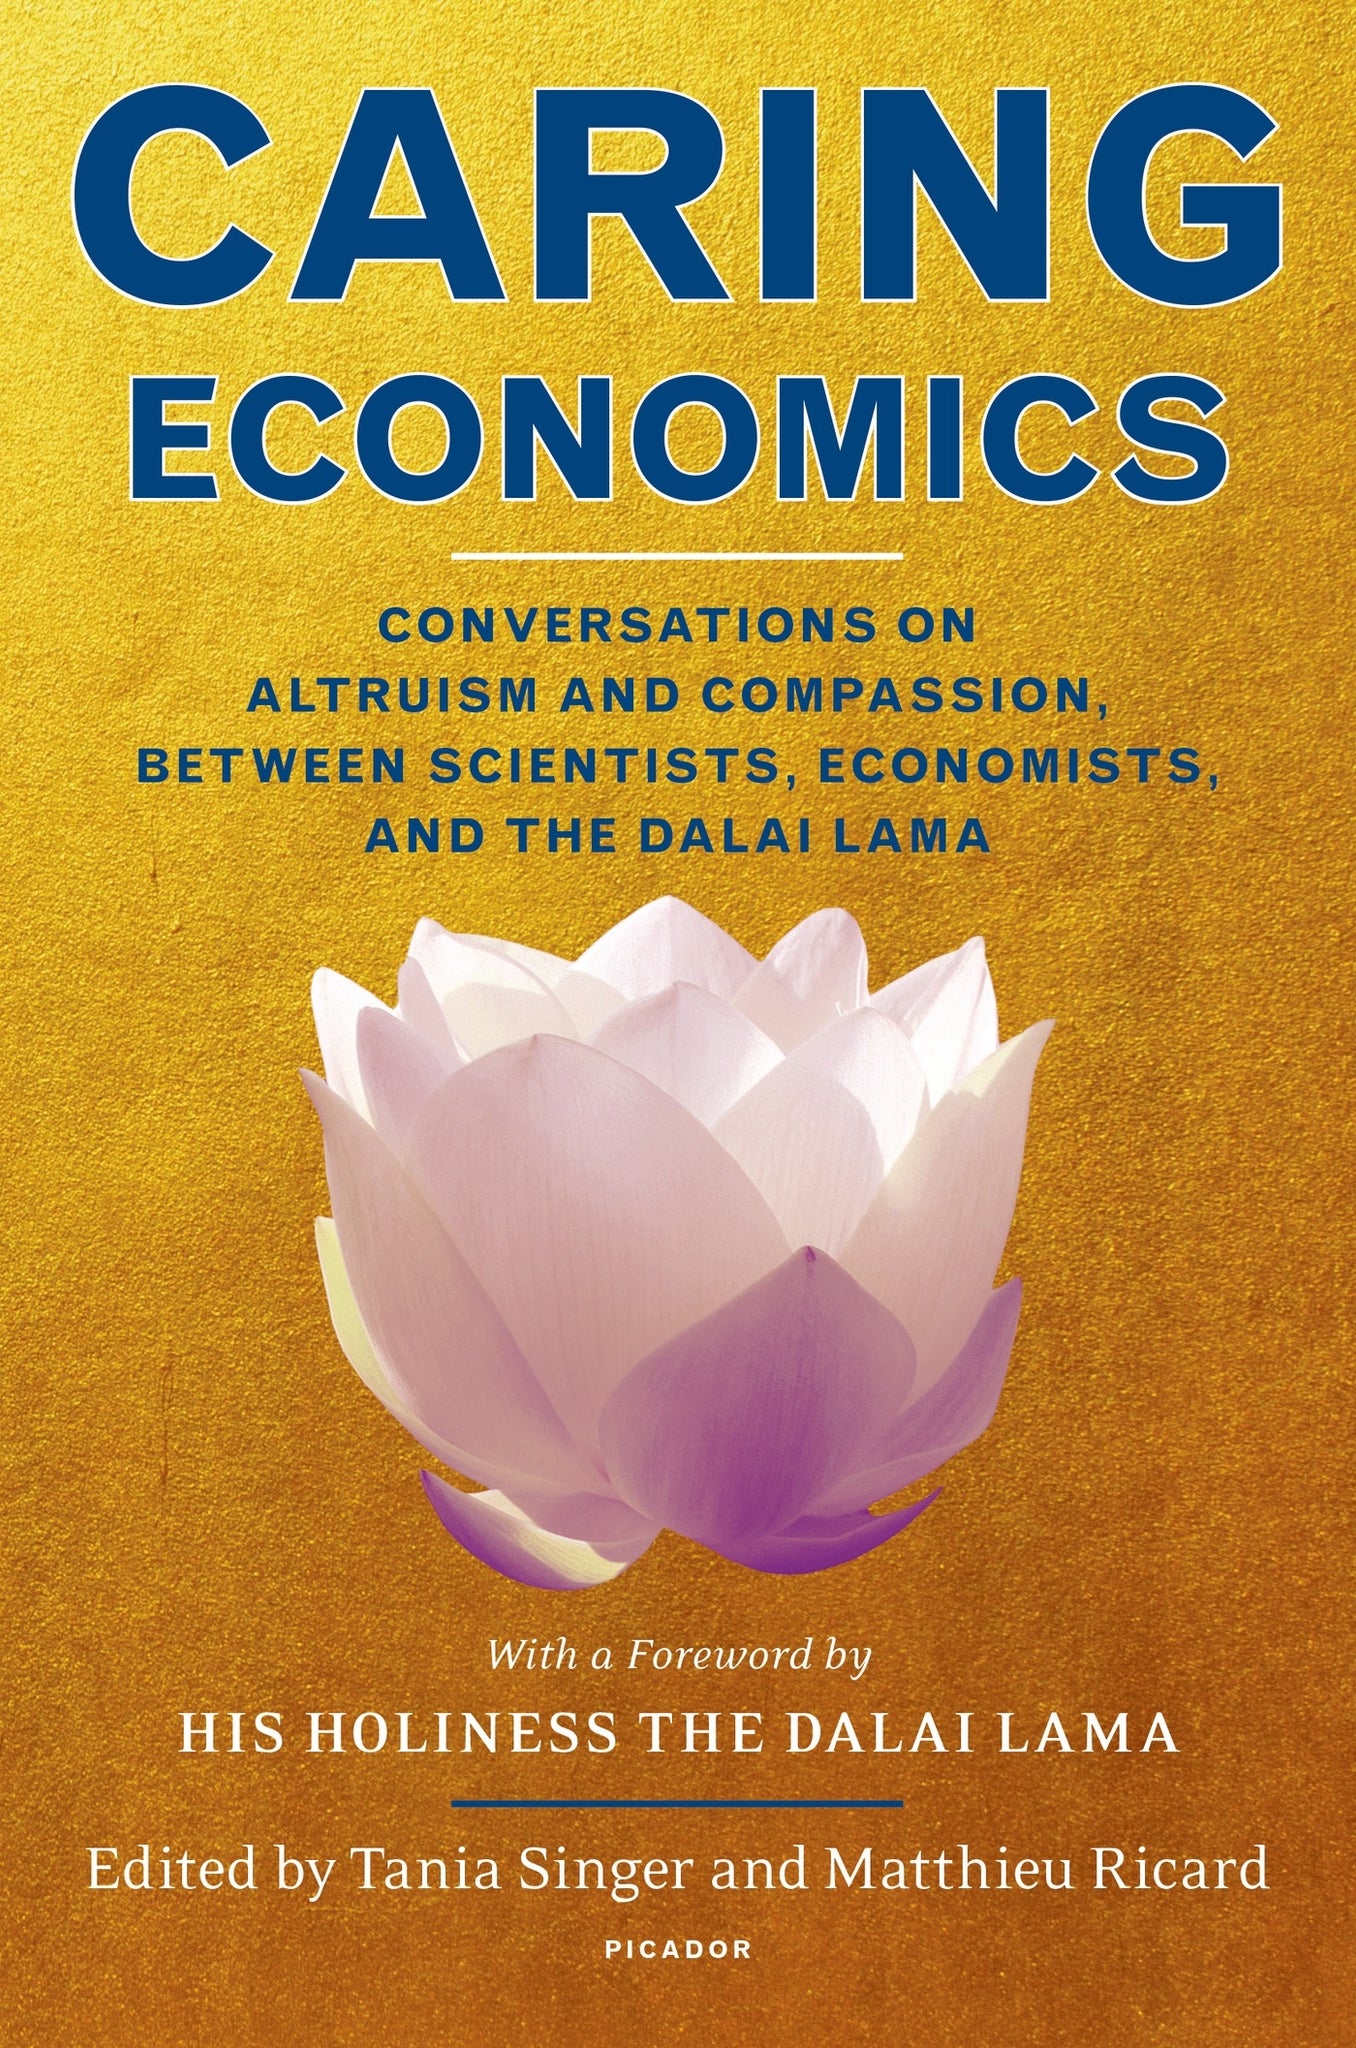 Caring Economics : Conversations on Altruism and Compassion, Between Scientists, Economists, and the Dalai Lama